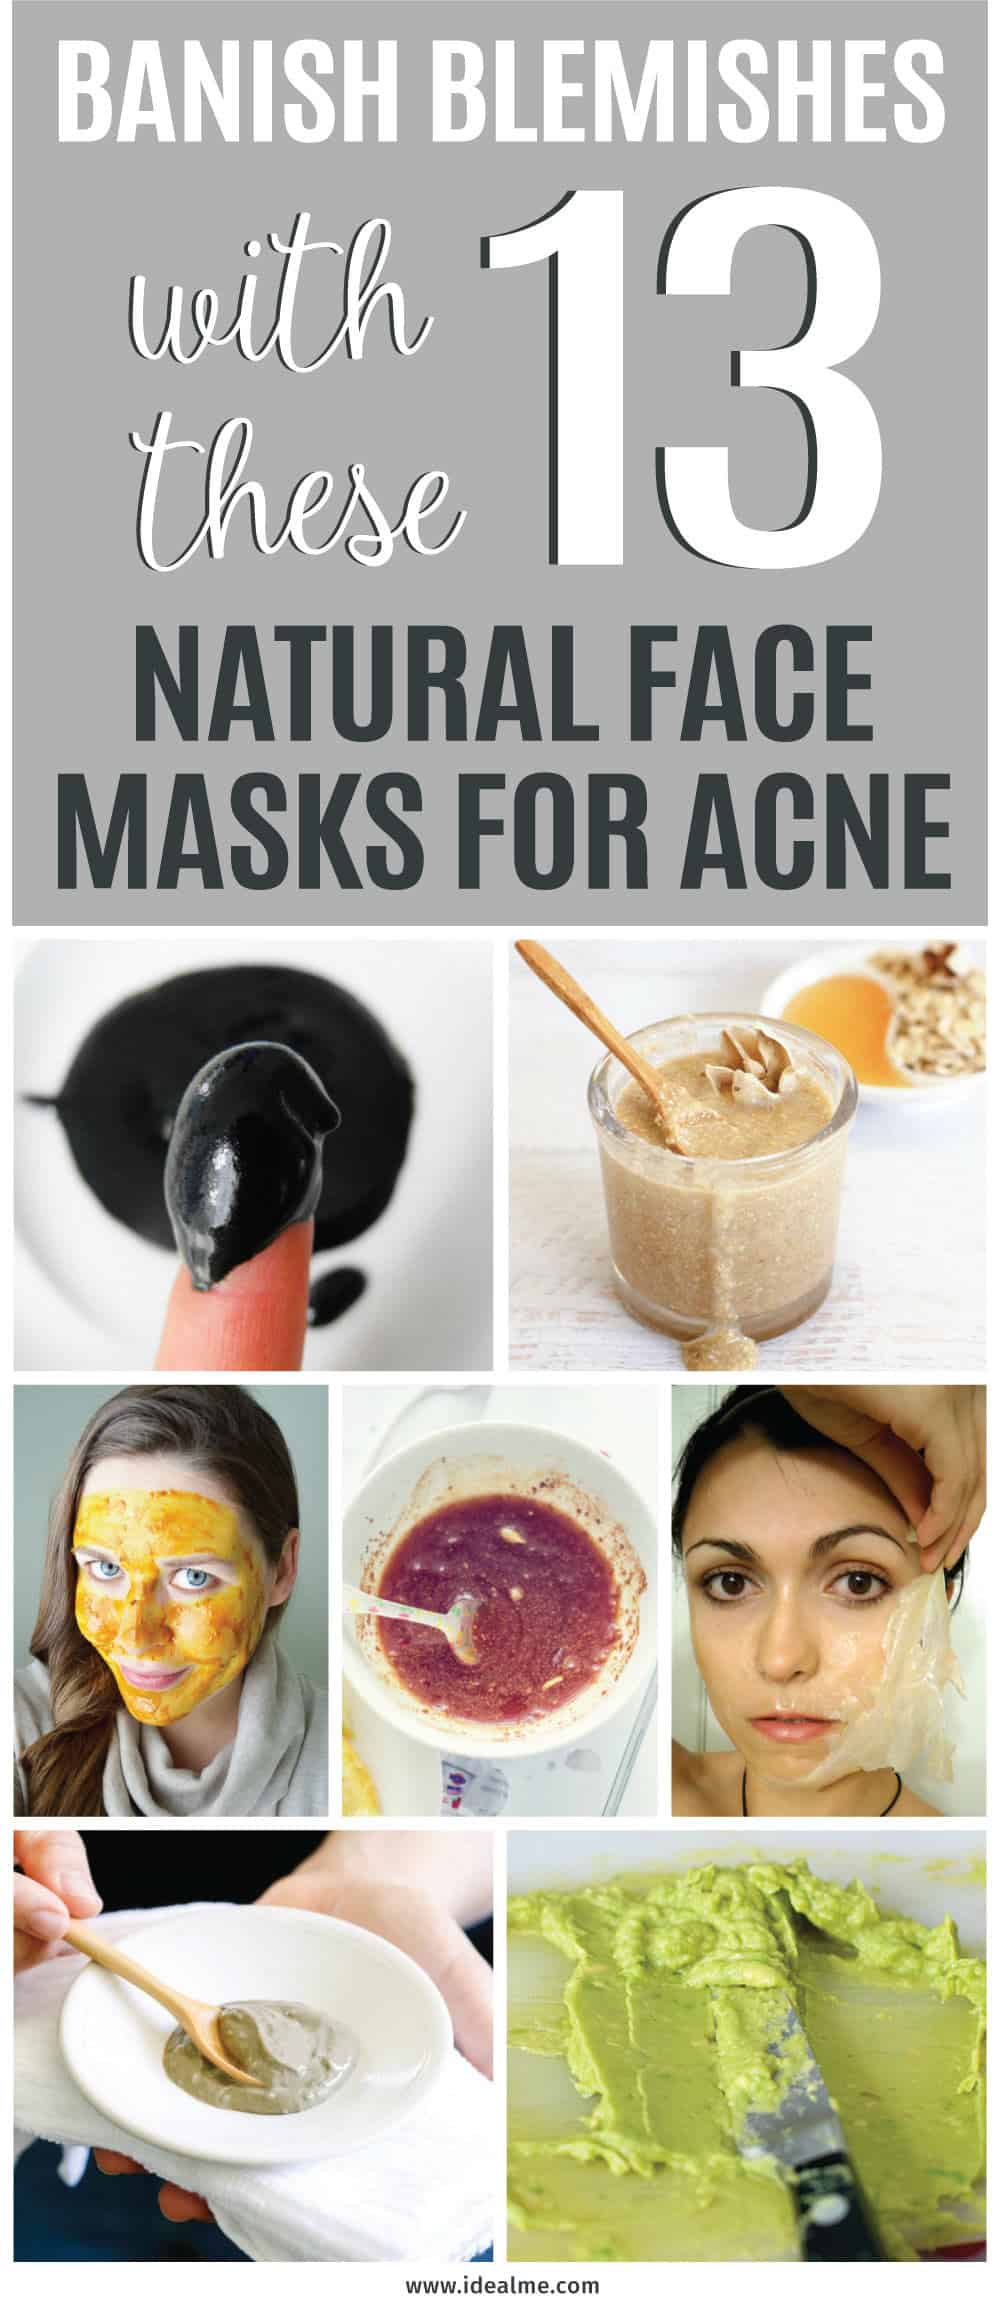 While facial masks might not be the ultimate acne cure, they can definitely improve the overall look and condition of your skin. If you’re tired of looking in the mirror and seeing problem skin, banish blemishes with these 13 natural face masks for acne.